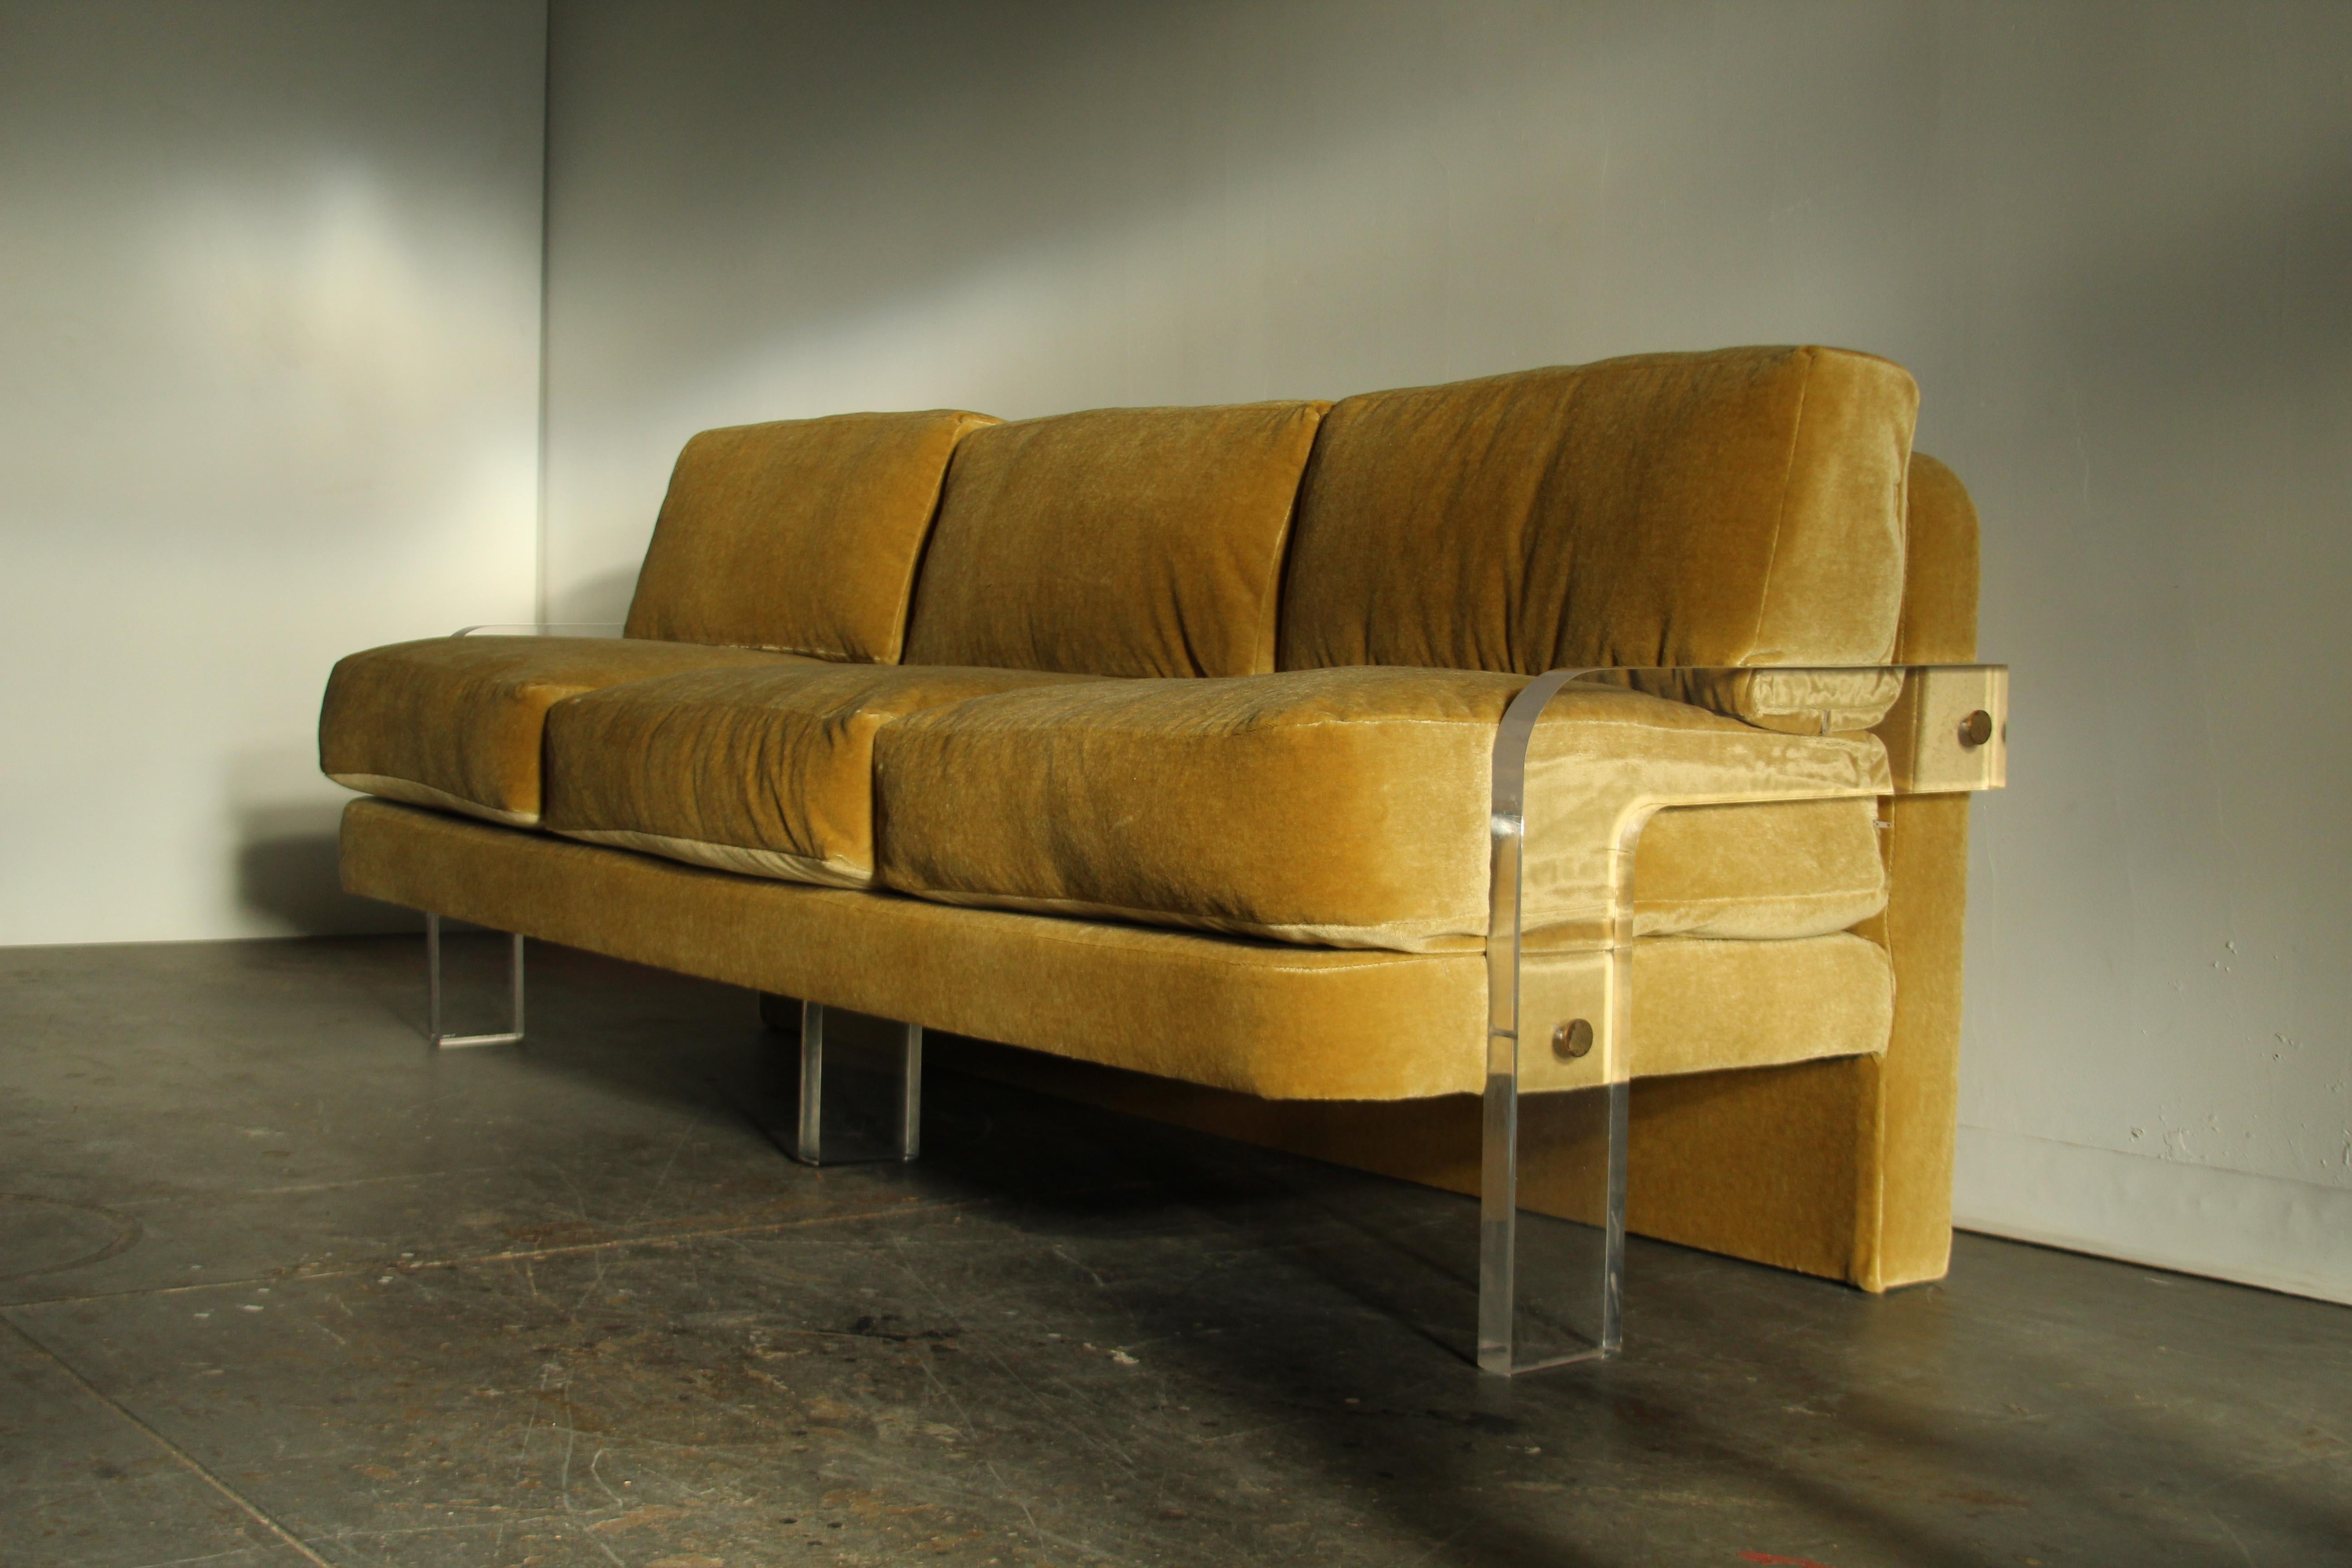 This uncommon 3-seat sofa is, quite simply, the bee's knees. Constructed of a solid wood frame with thick lucite arms and legs and brass accents, this sofa is the epitome of chic. While it remains a little bit of a mystery, this design has always